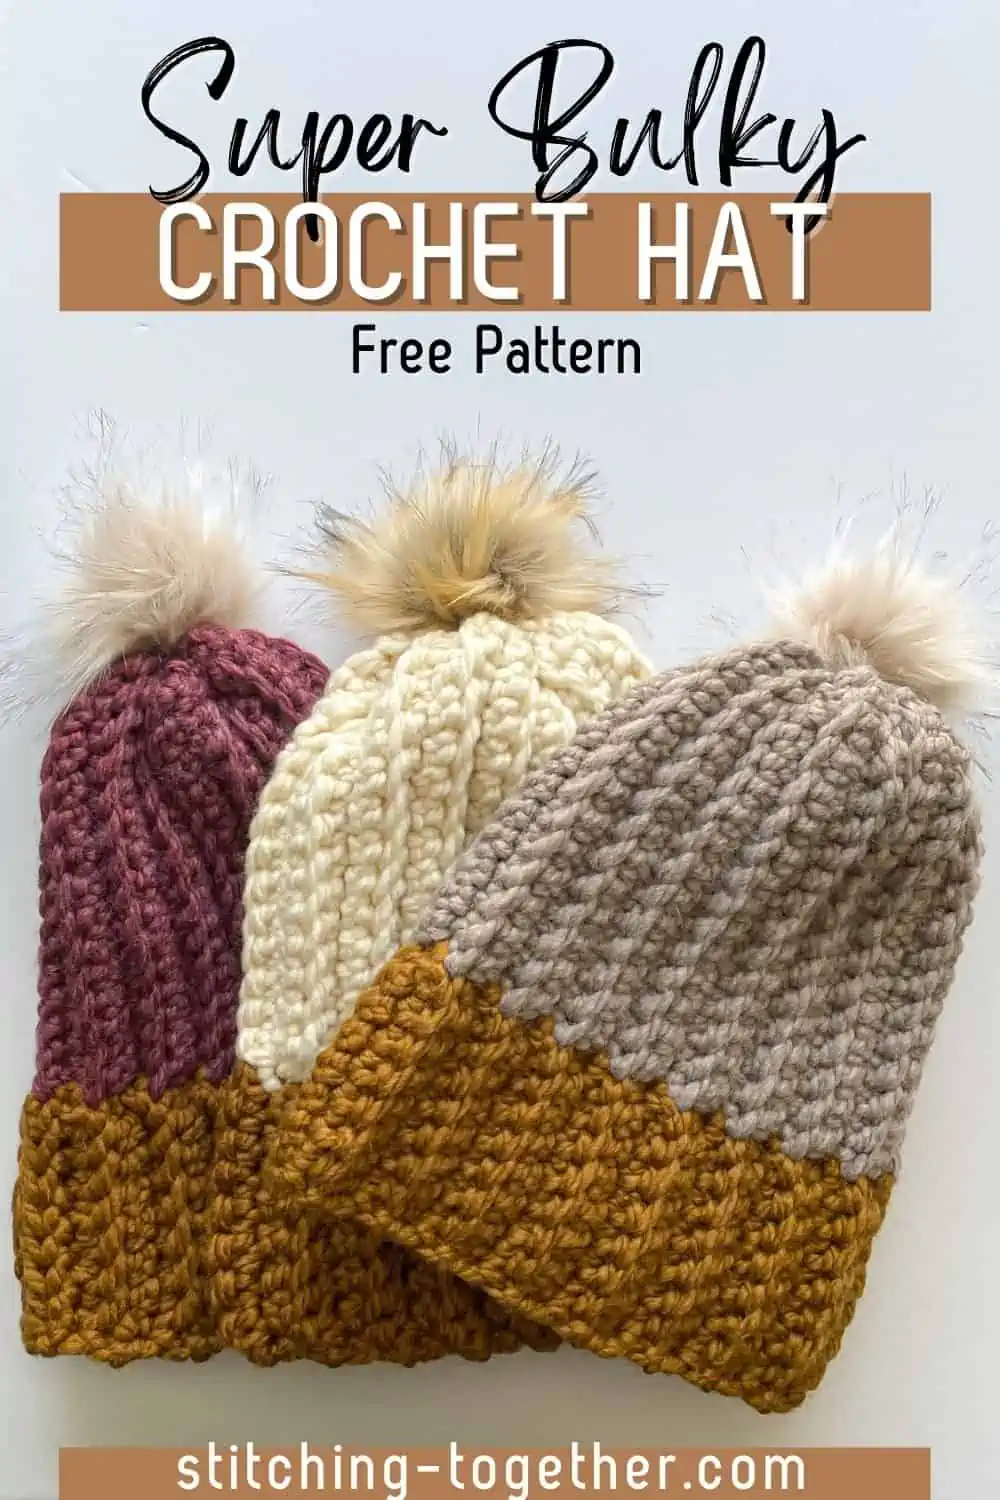 graphic reading "super bulky crochet hat free pattern" with three crochet hats laying flat